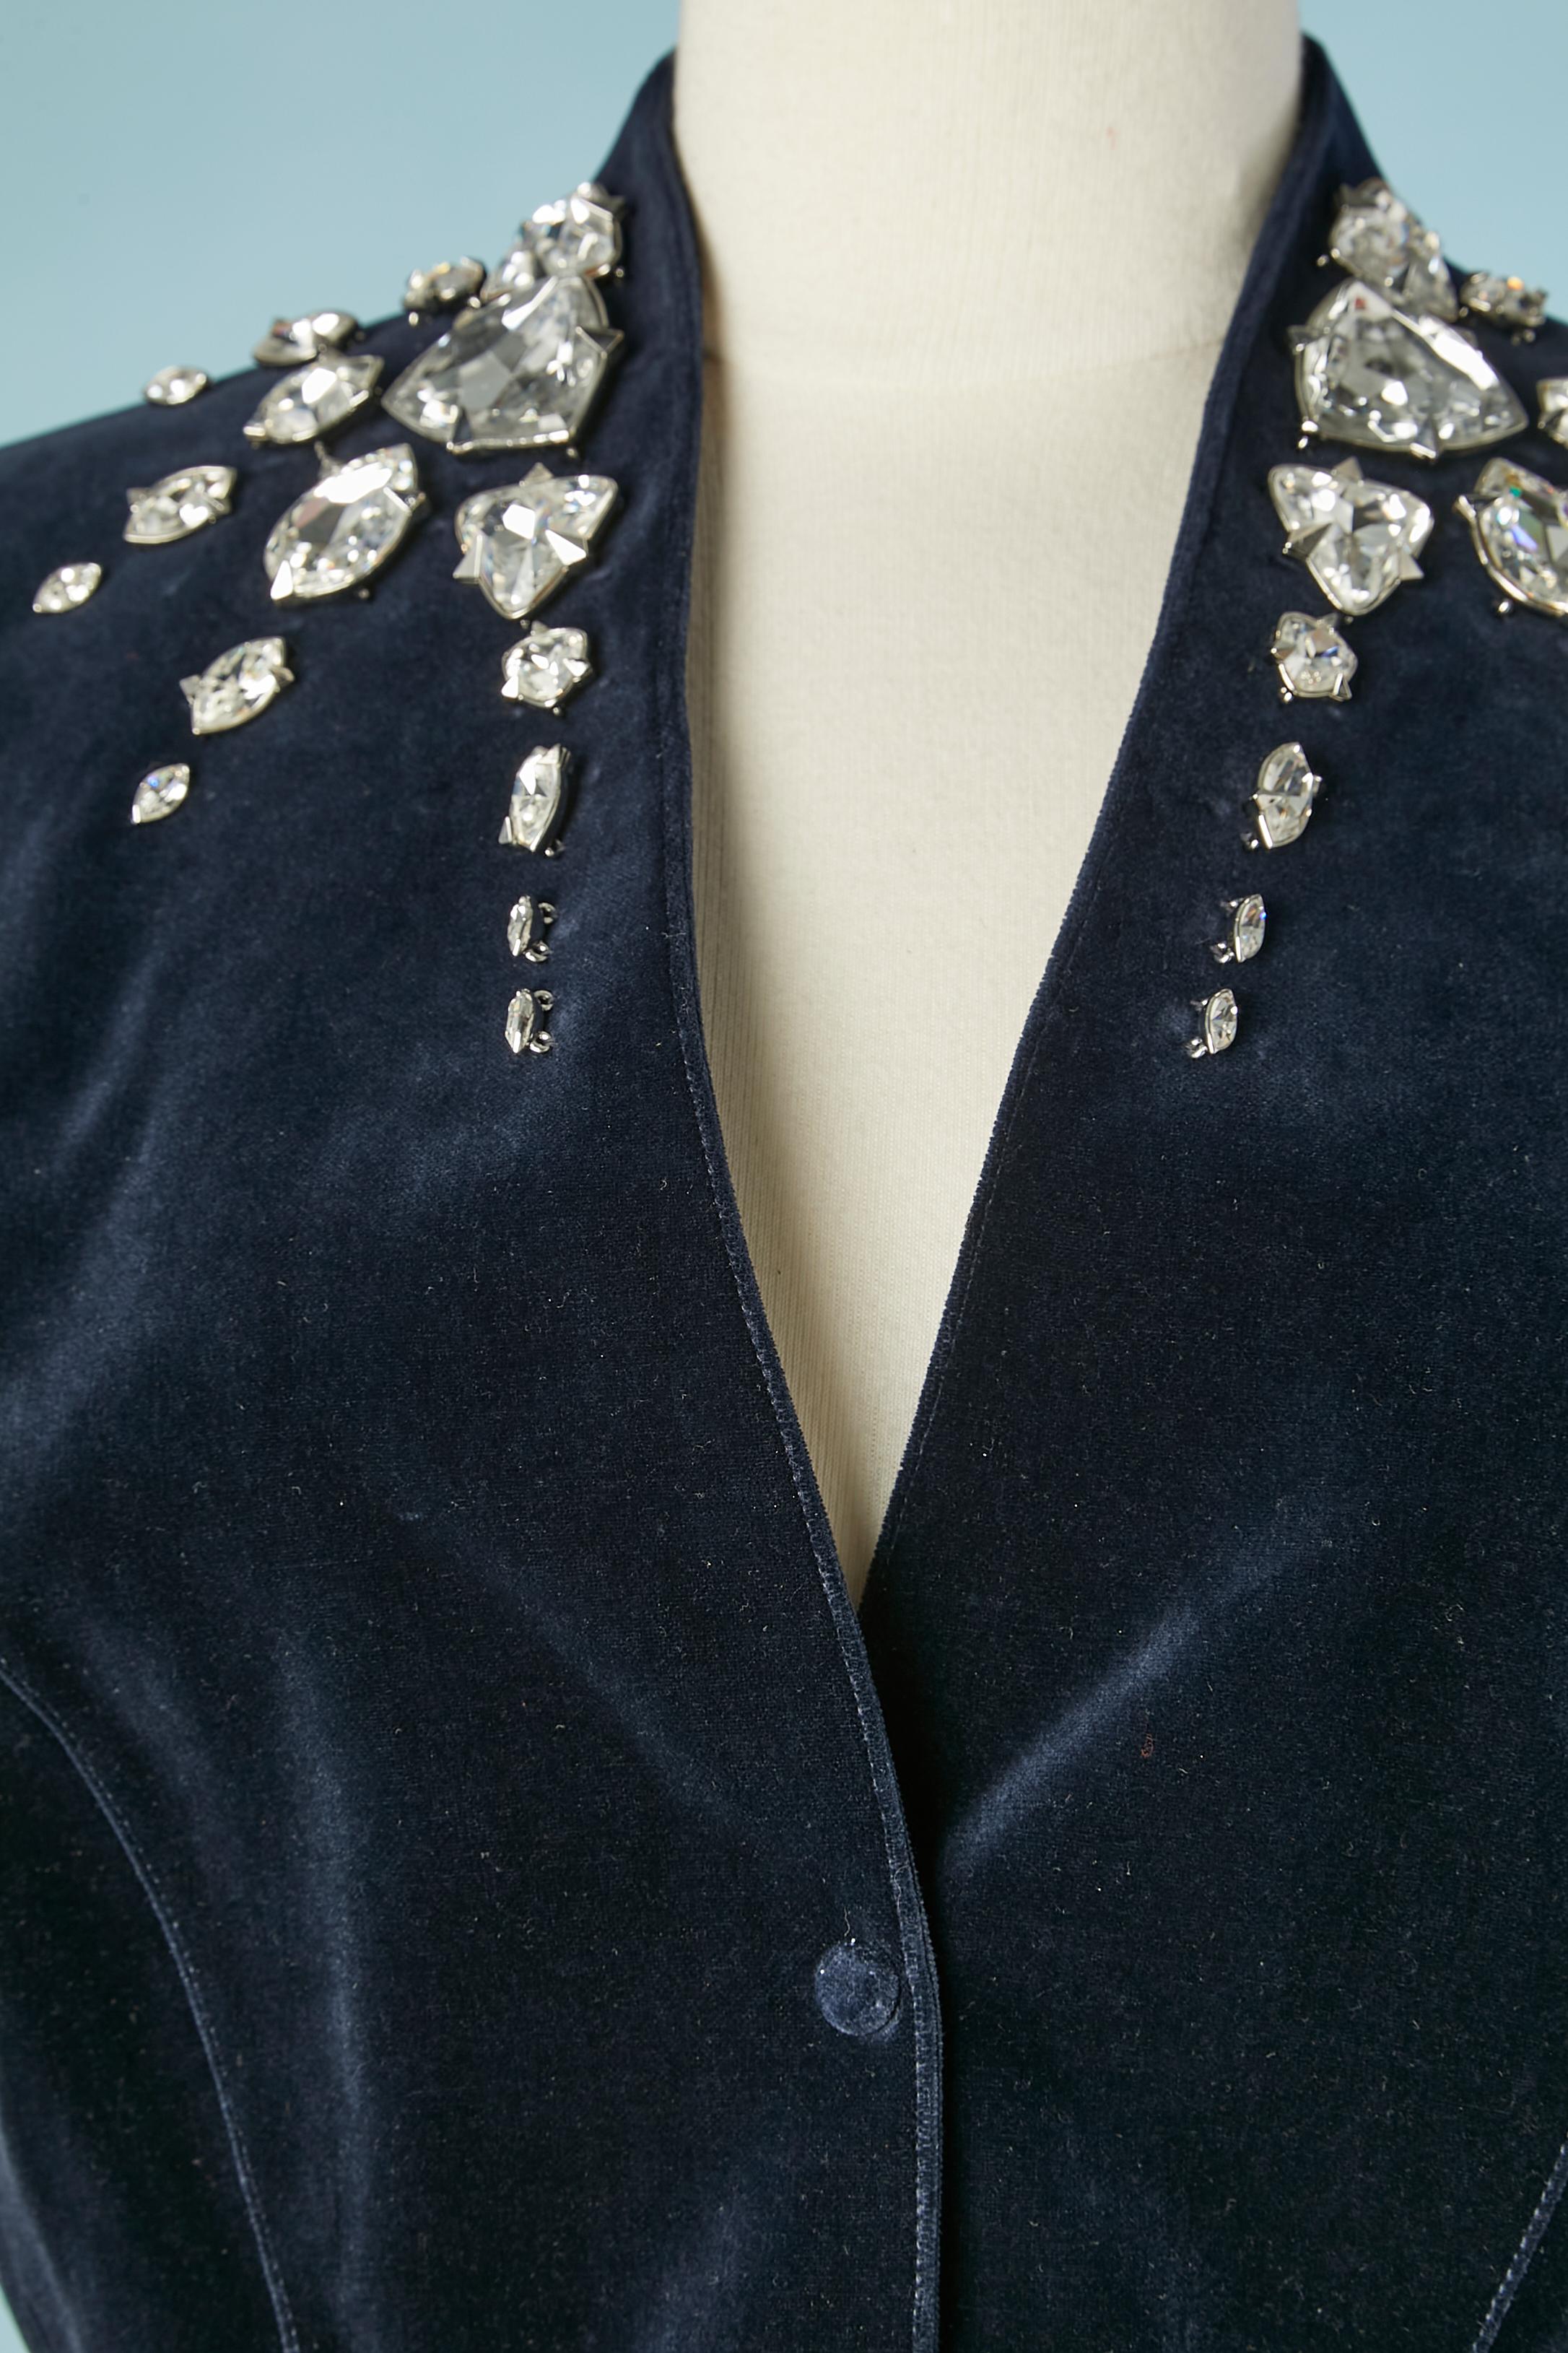 Night blue velvet skirt-suit with rhinestone embellishment Thierry Mugler  In Excellent Condition For Sale In Saint-Ouen-Sur-Seine, FR